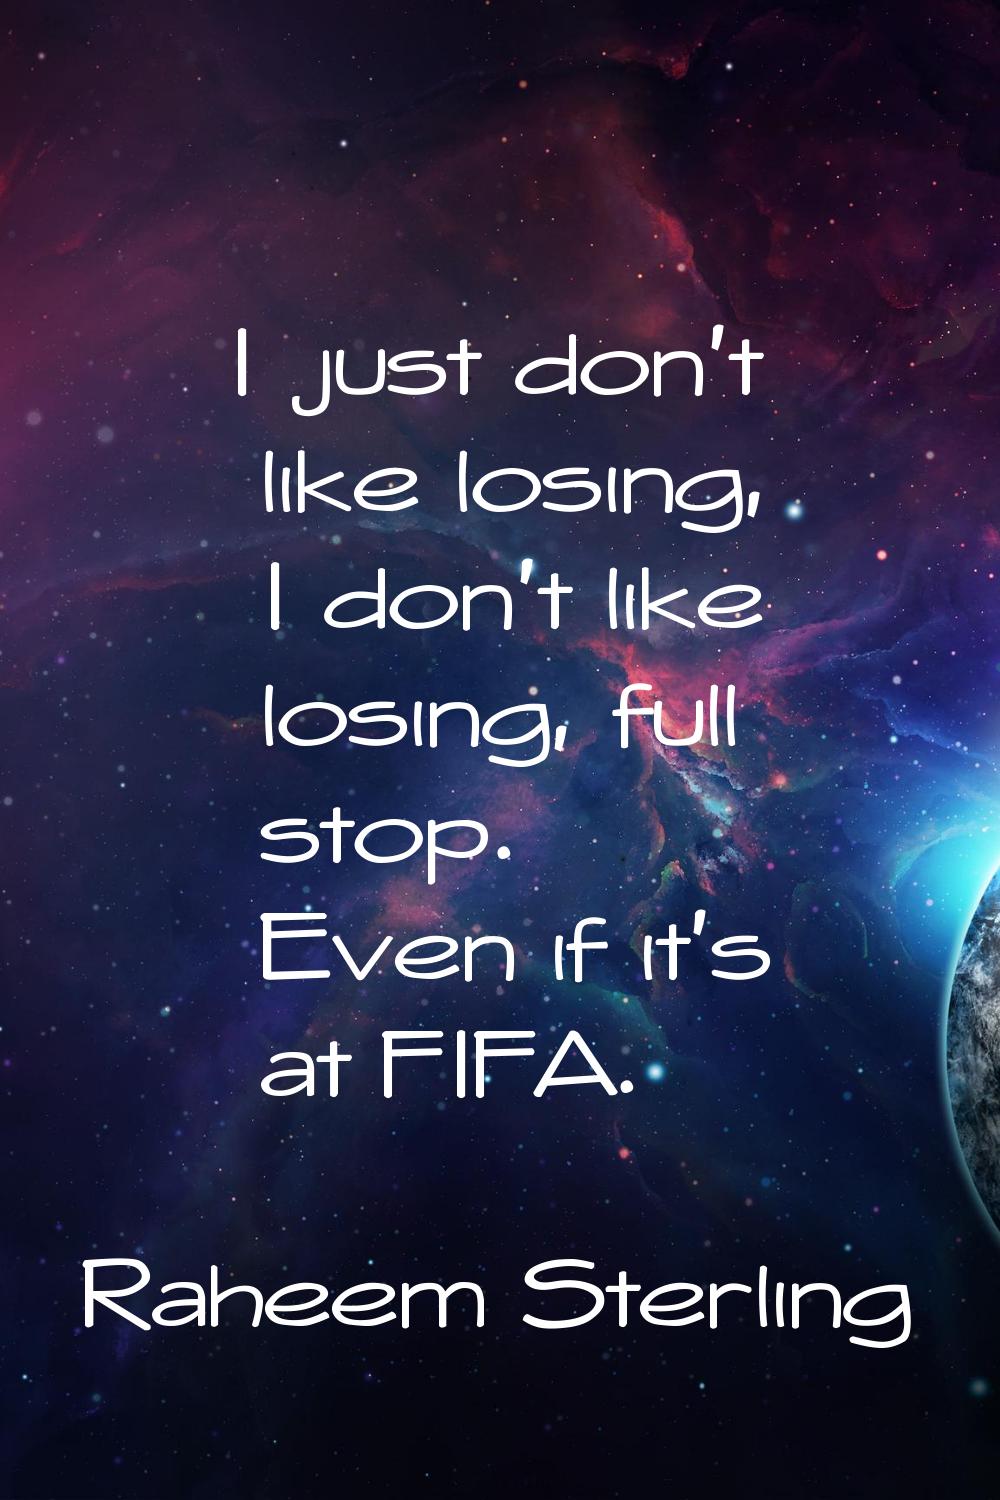 I just don't like losing, I don't like losing, full stop. Even if it's at FIFA.